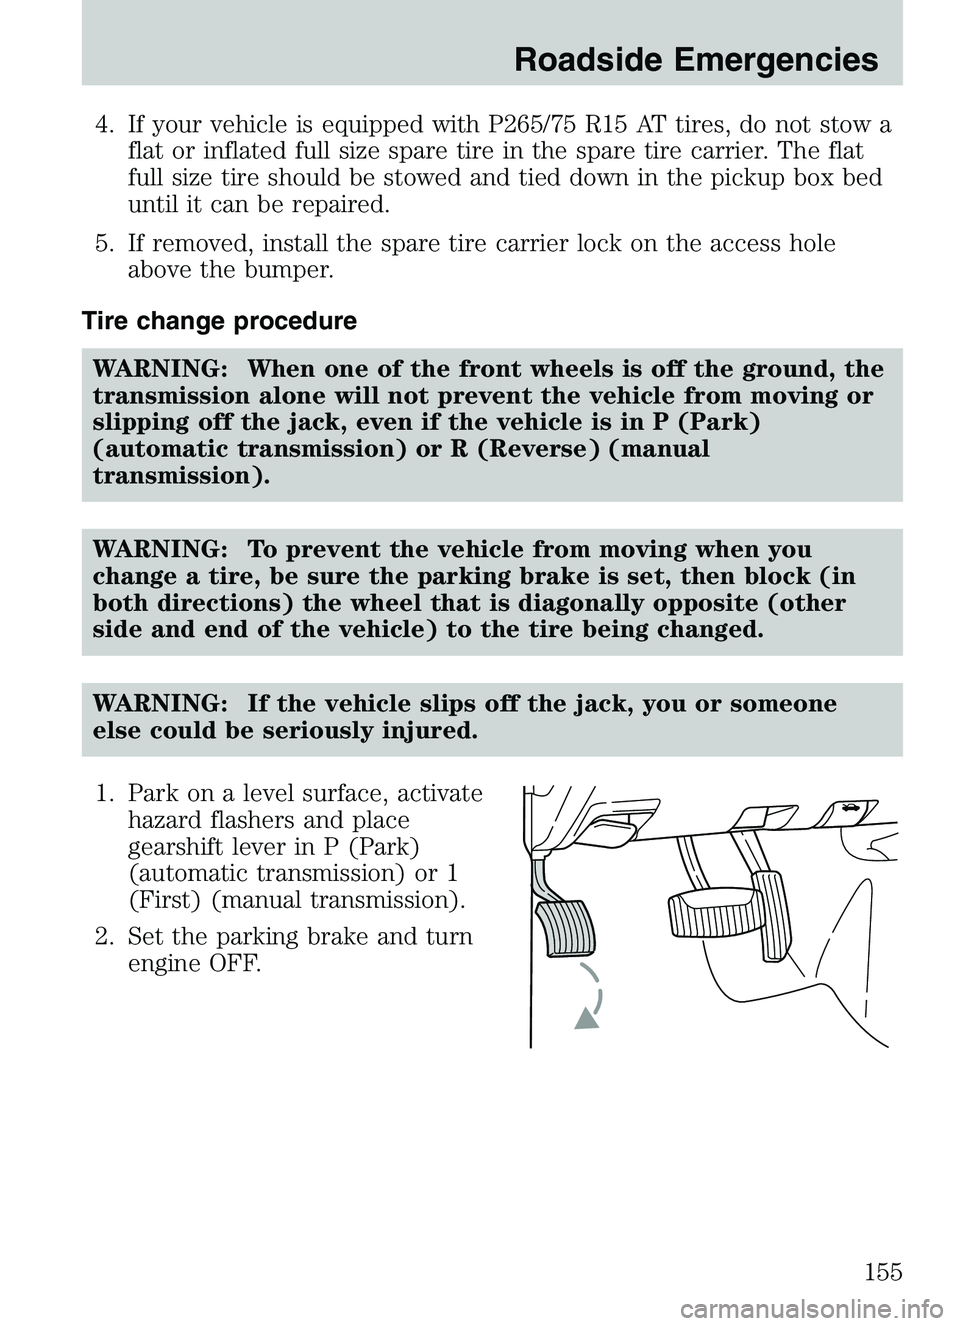 MAZDA MODEL B4000 2003  Owners Manual 4. If your vehicle is equipped with P265/75 R15 AT tires, do not stow aflat or inflated full size spare tire in the spare tire carrier. The flat
full size tire should be stowed and tied down in the pi